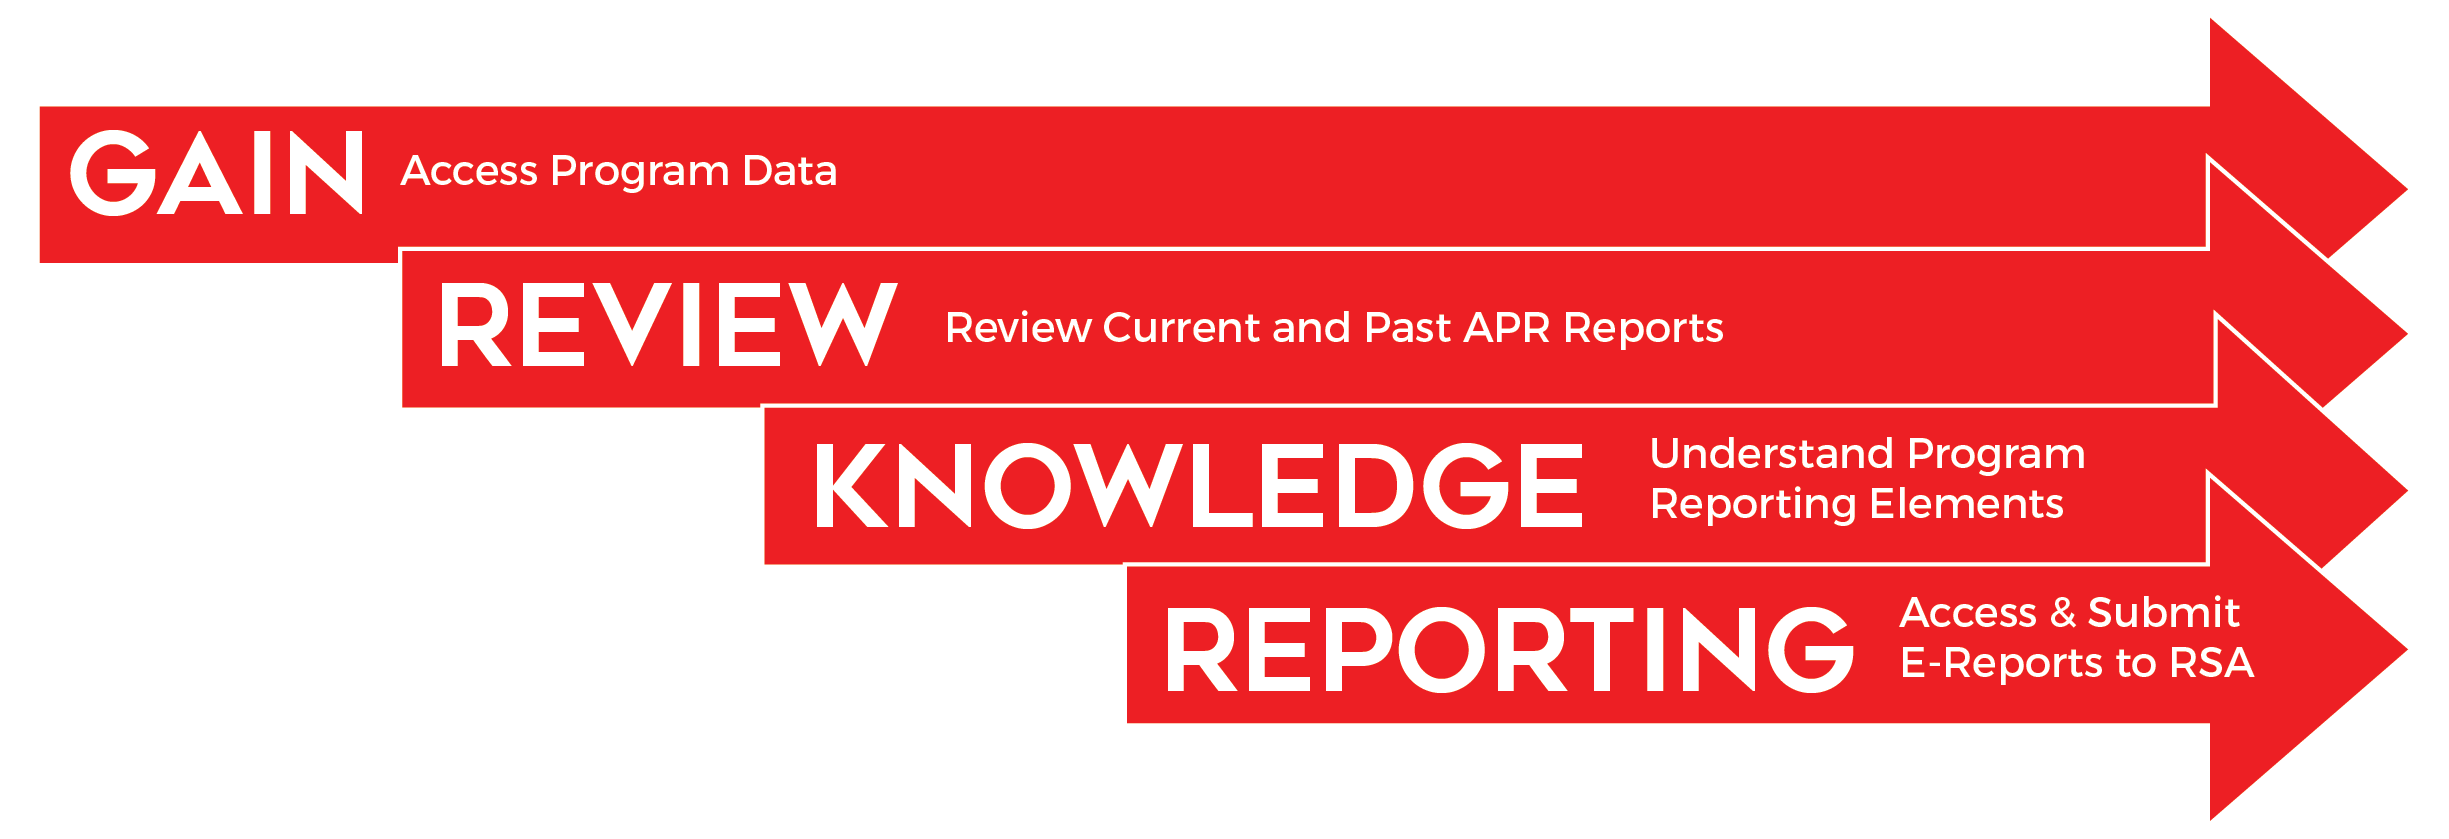 Gain: Access Program Data. Review: Review current and Past APR Reports. Knowledge: Understand Program Reporting Elements. Reporting: Access & Submit E-Reports to RSA.